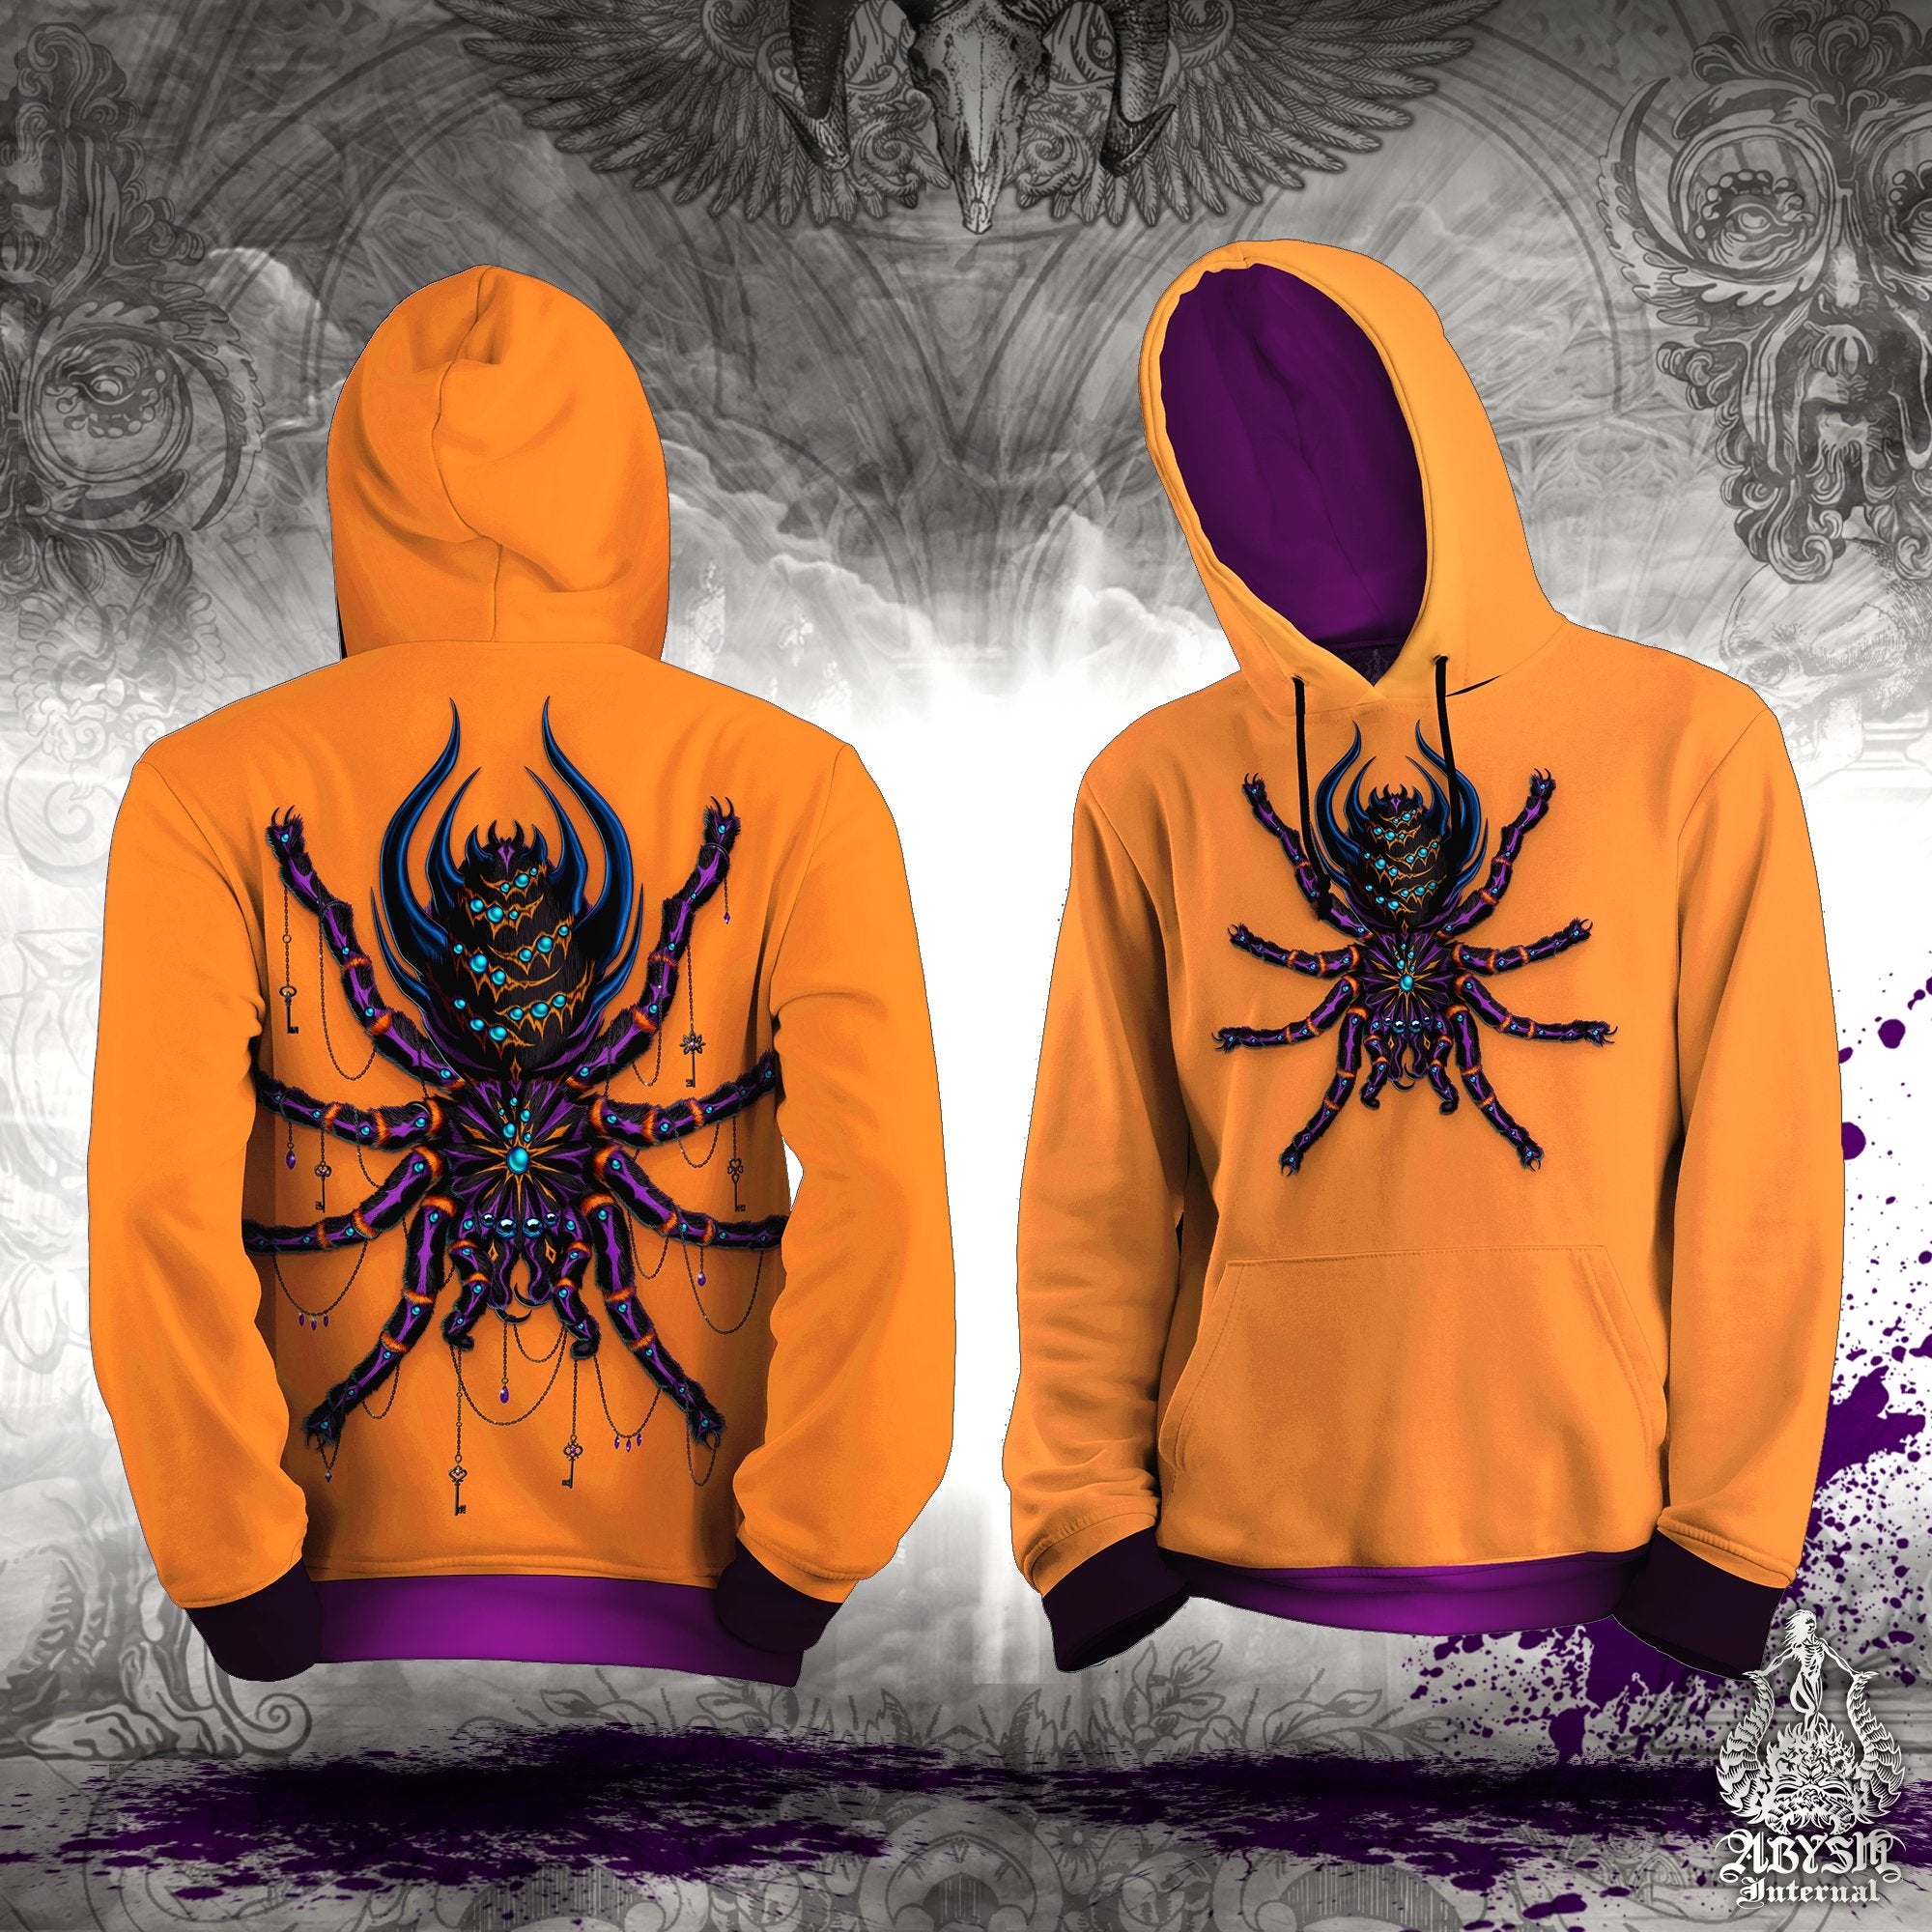 Tarantula Hoodie, White Pullover, Gothic Streetwear, Street Outfit,  Festival Sweater, Alternative Clothing, Unisex - Spider, Bloody Goth